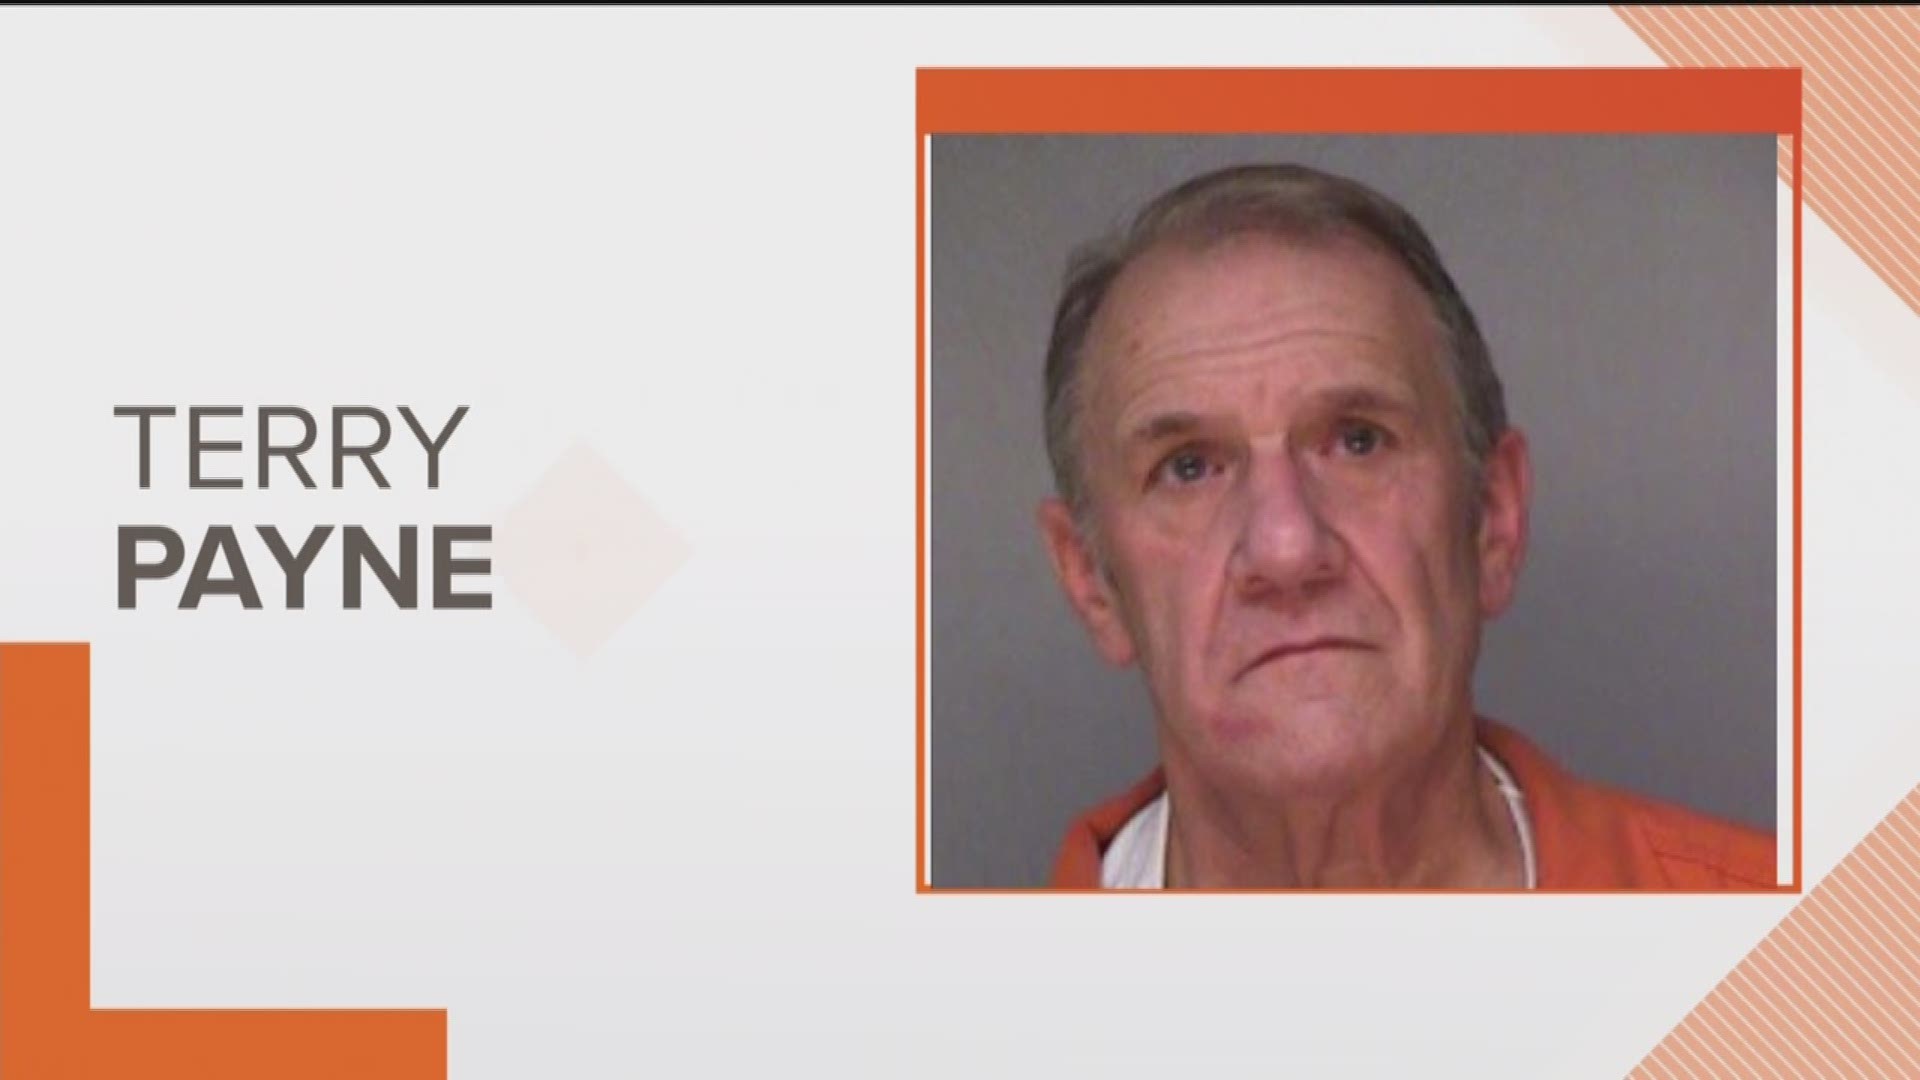 64-year-old Terry Payne turned himself in Wednesday after allegedly hitting and killing a woman walking on I-75 North in Macon Saturday.